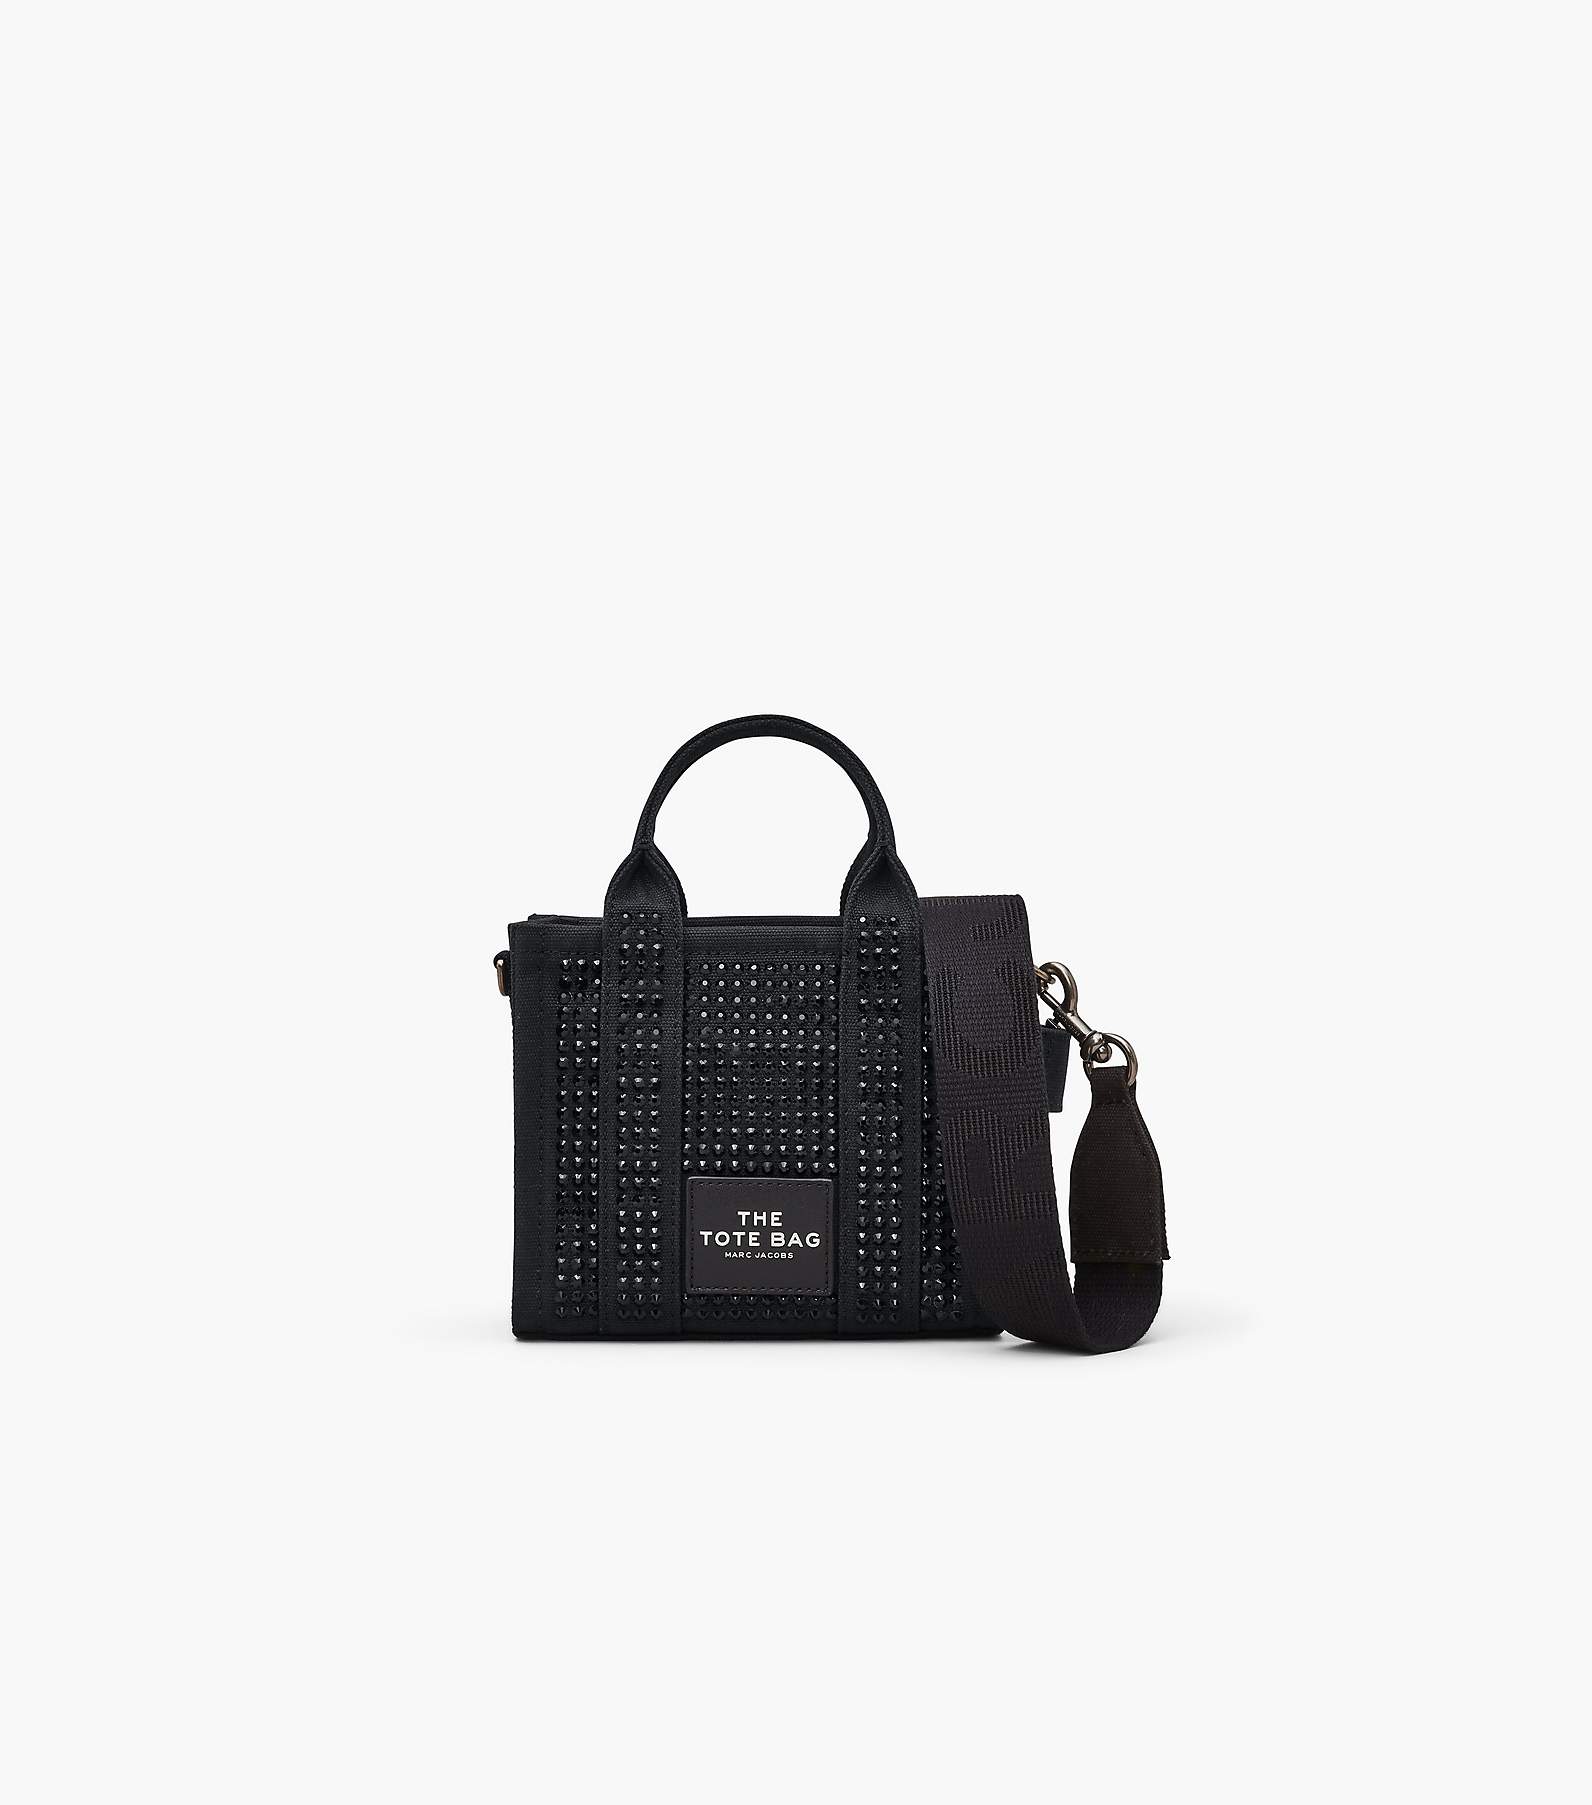 The Crystal Canvas Mini Tote Bag, Marc Jacobs